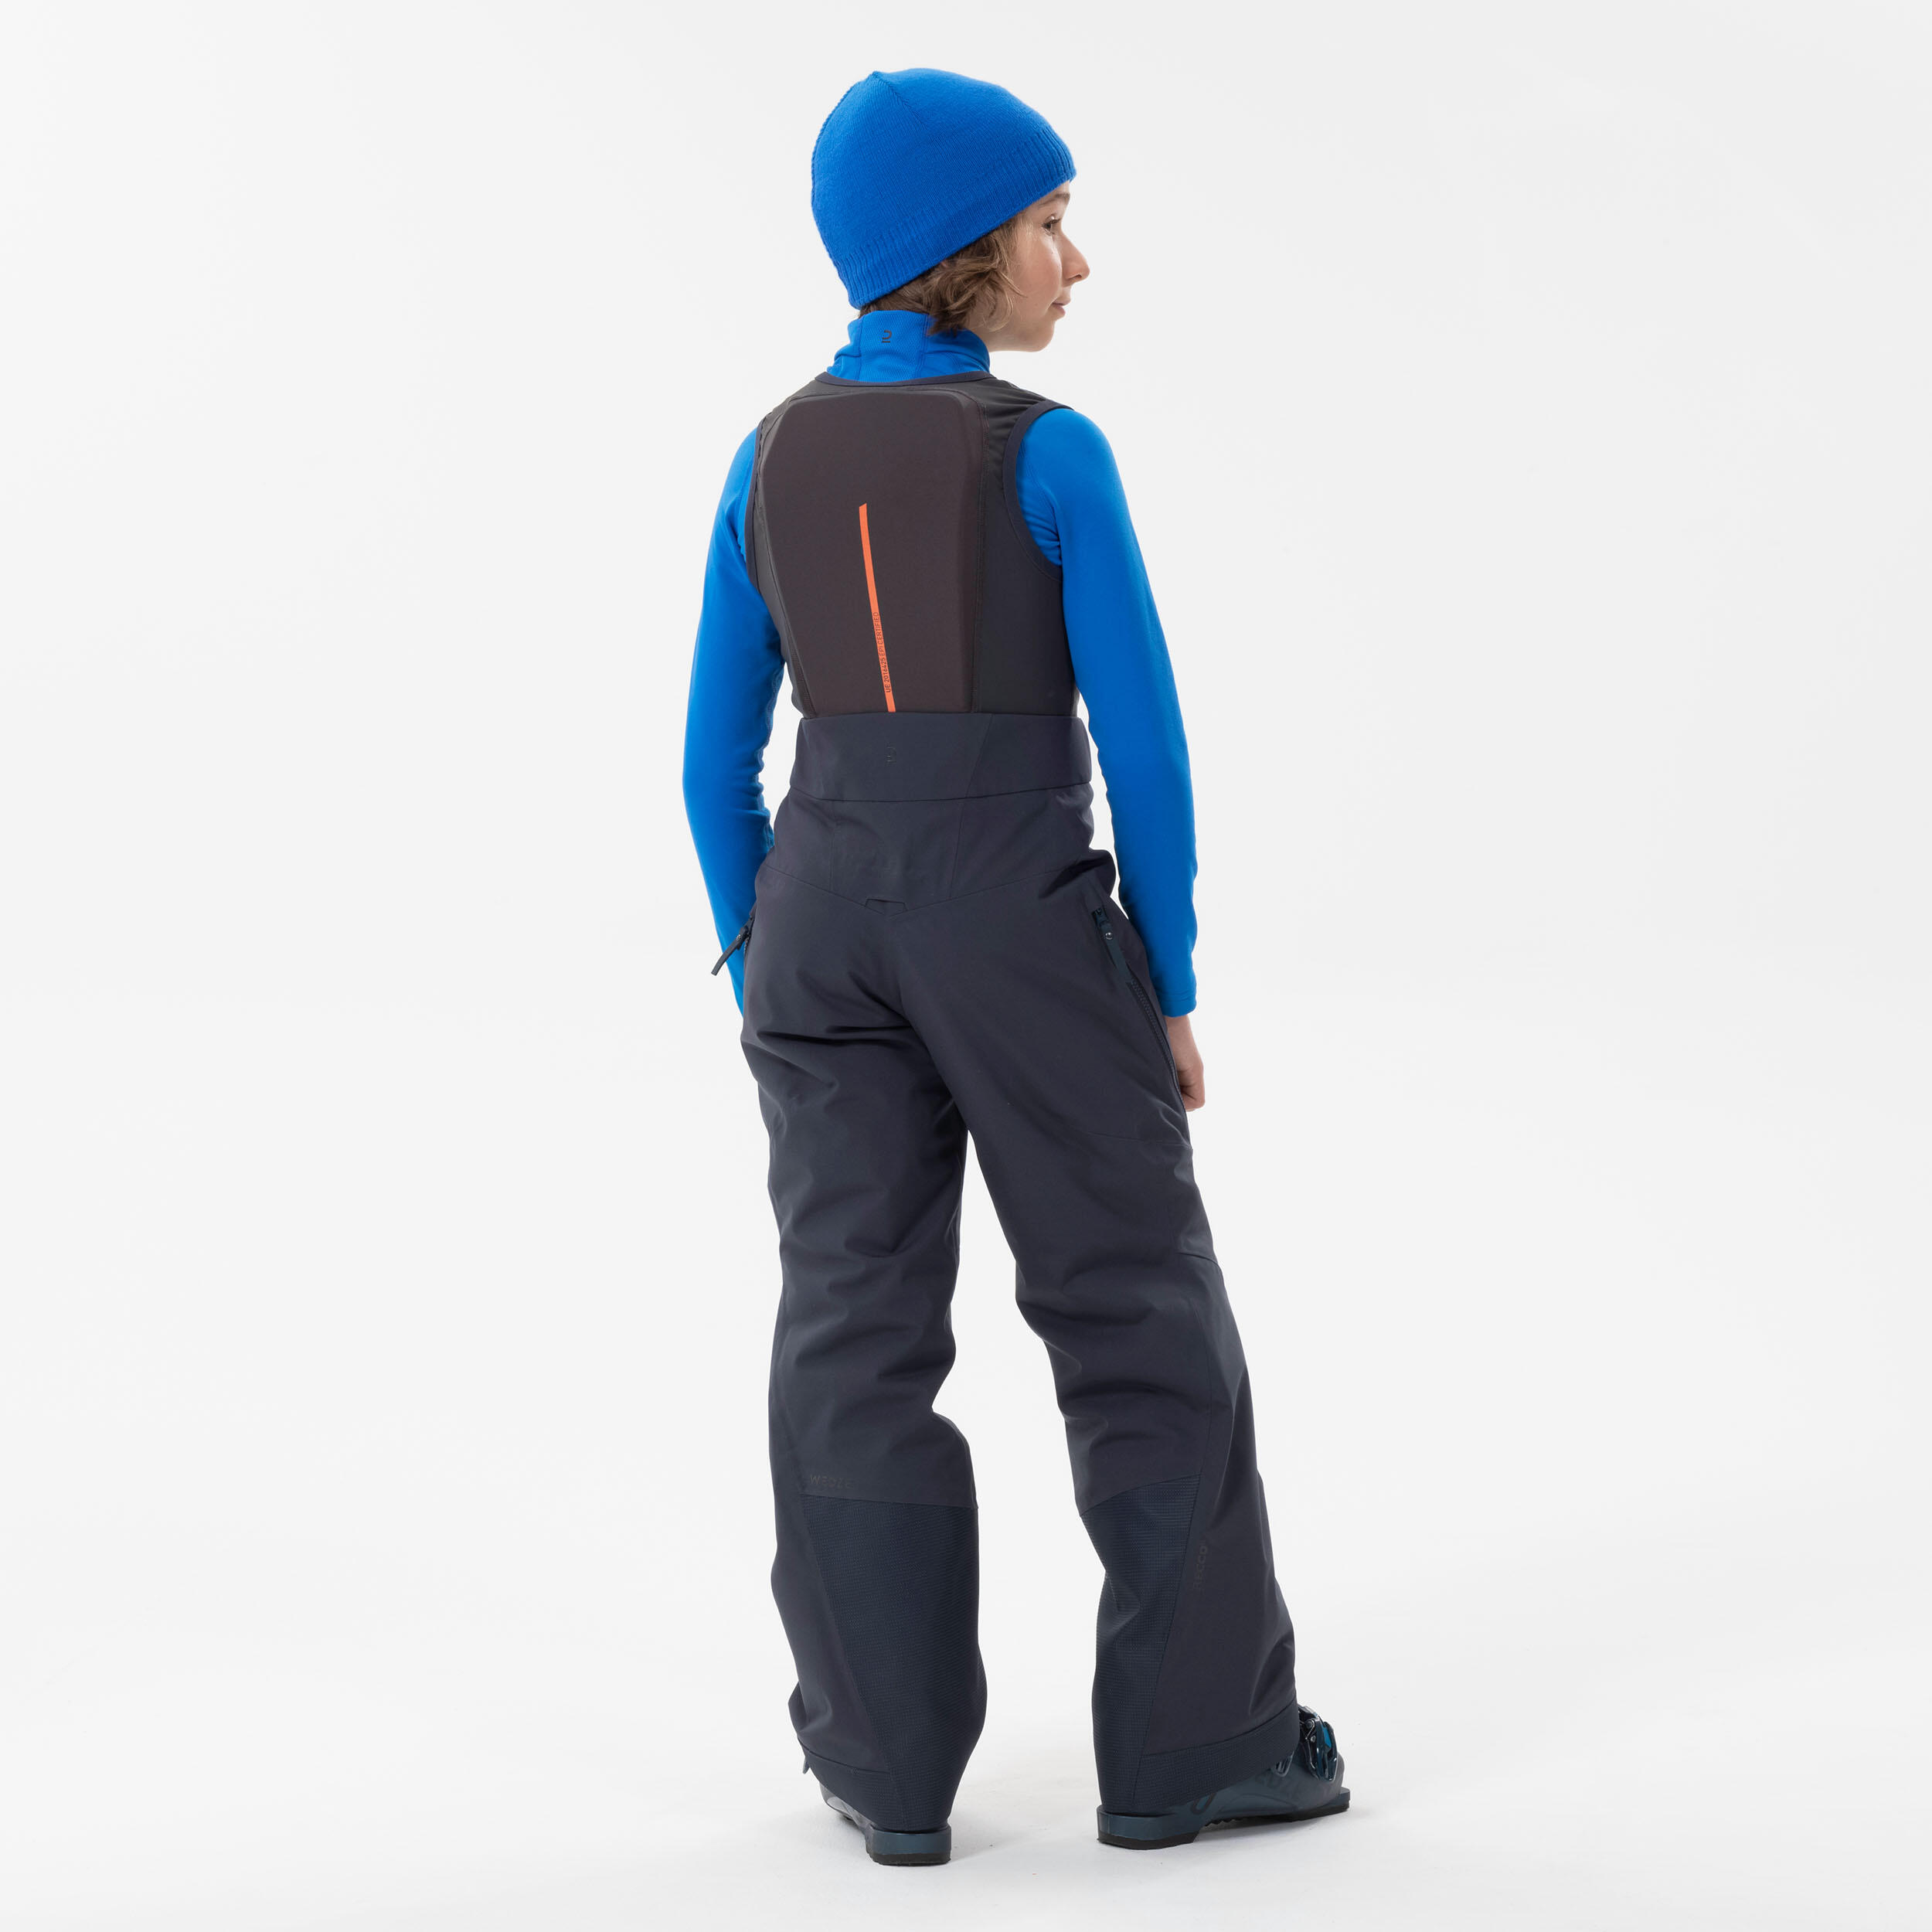 KIDS’ SKI TROUSERS WITH BACK PROTECTOR - FR900 - NAVY BLUE 3/11